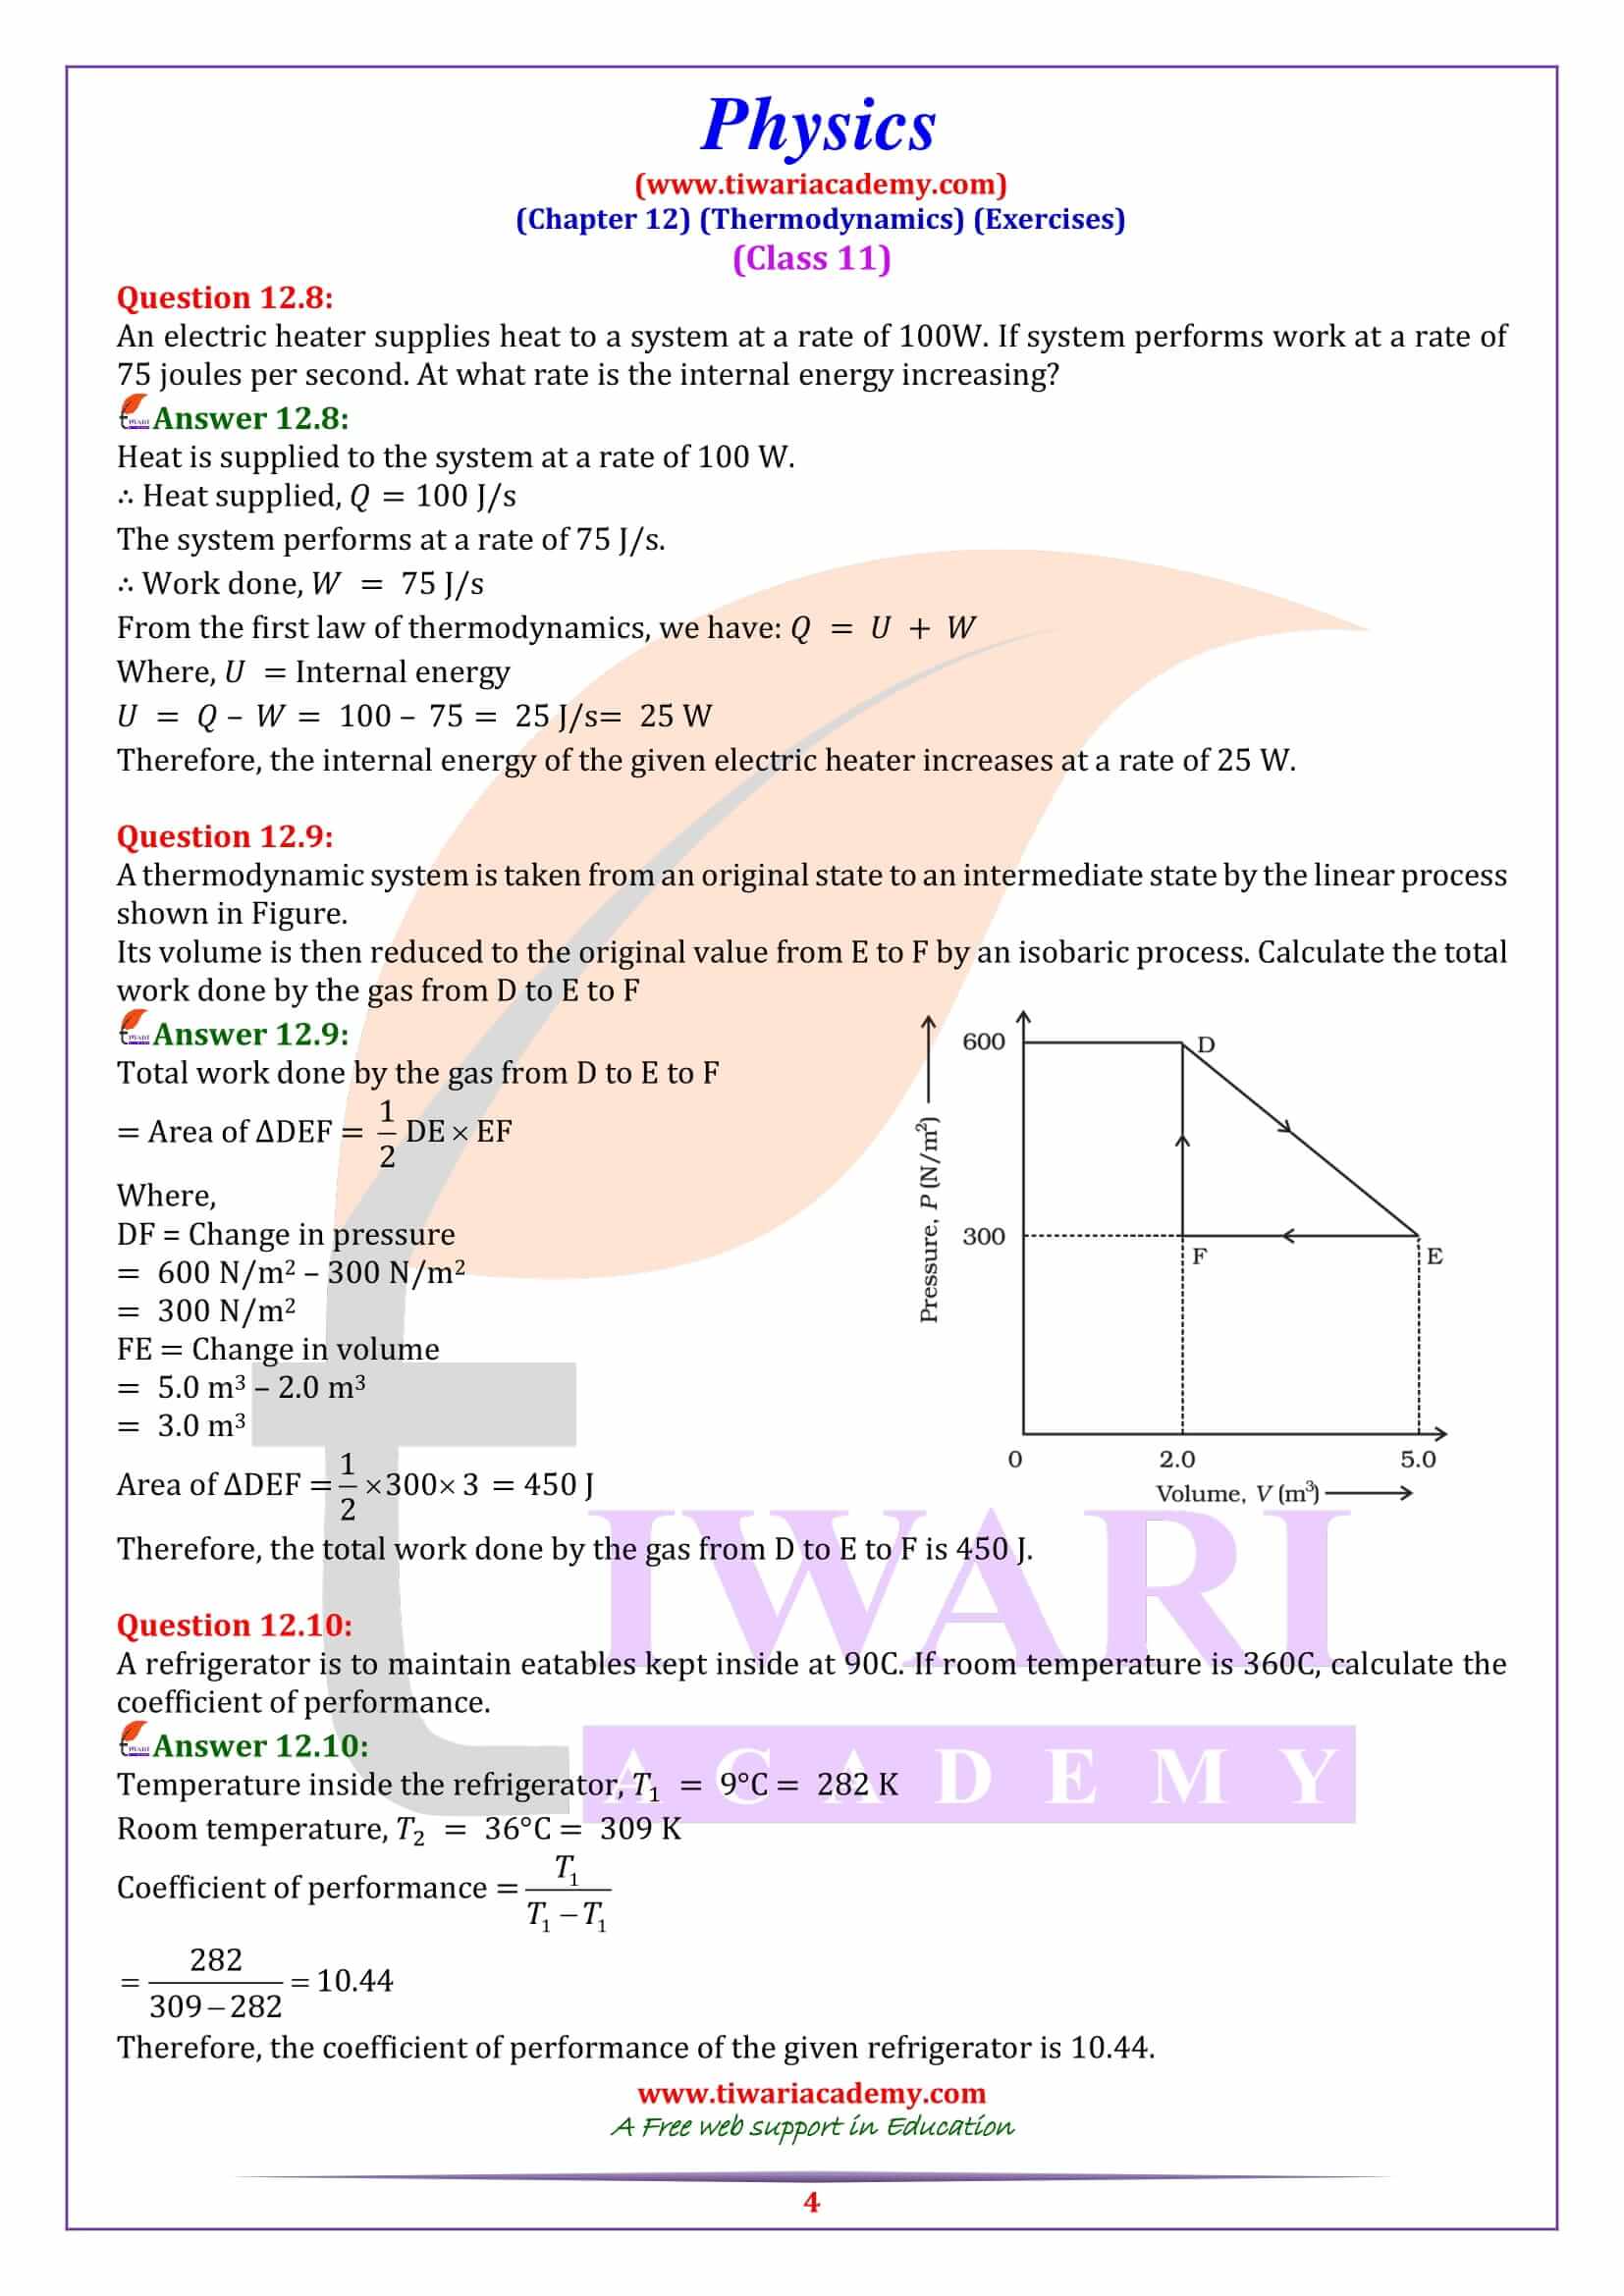 Class 11 Physics Chapter 12 Question Answers